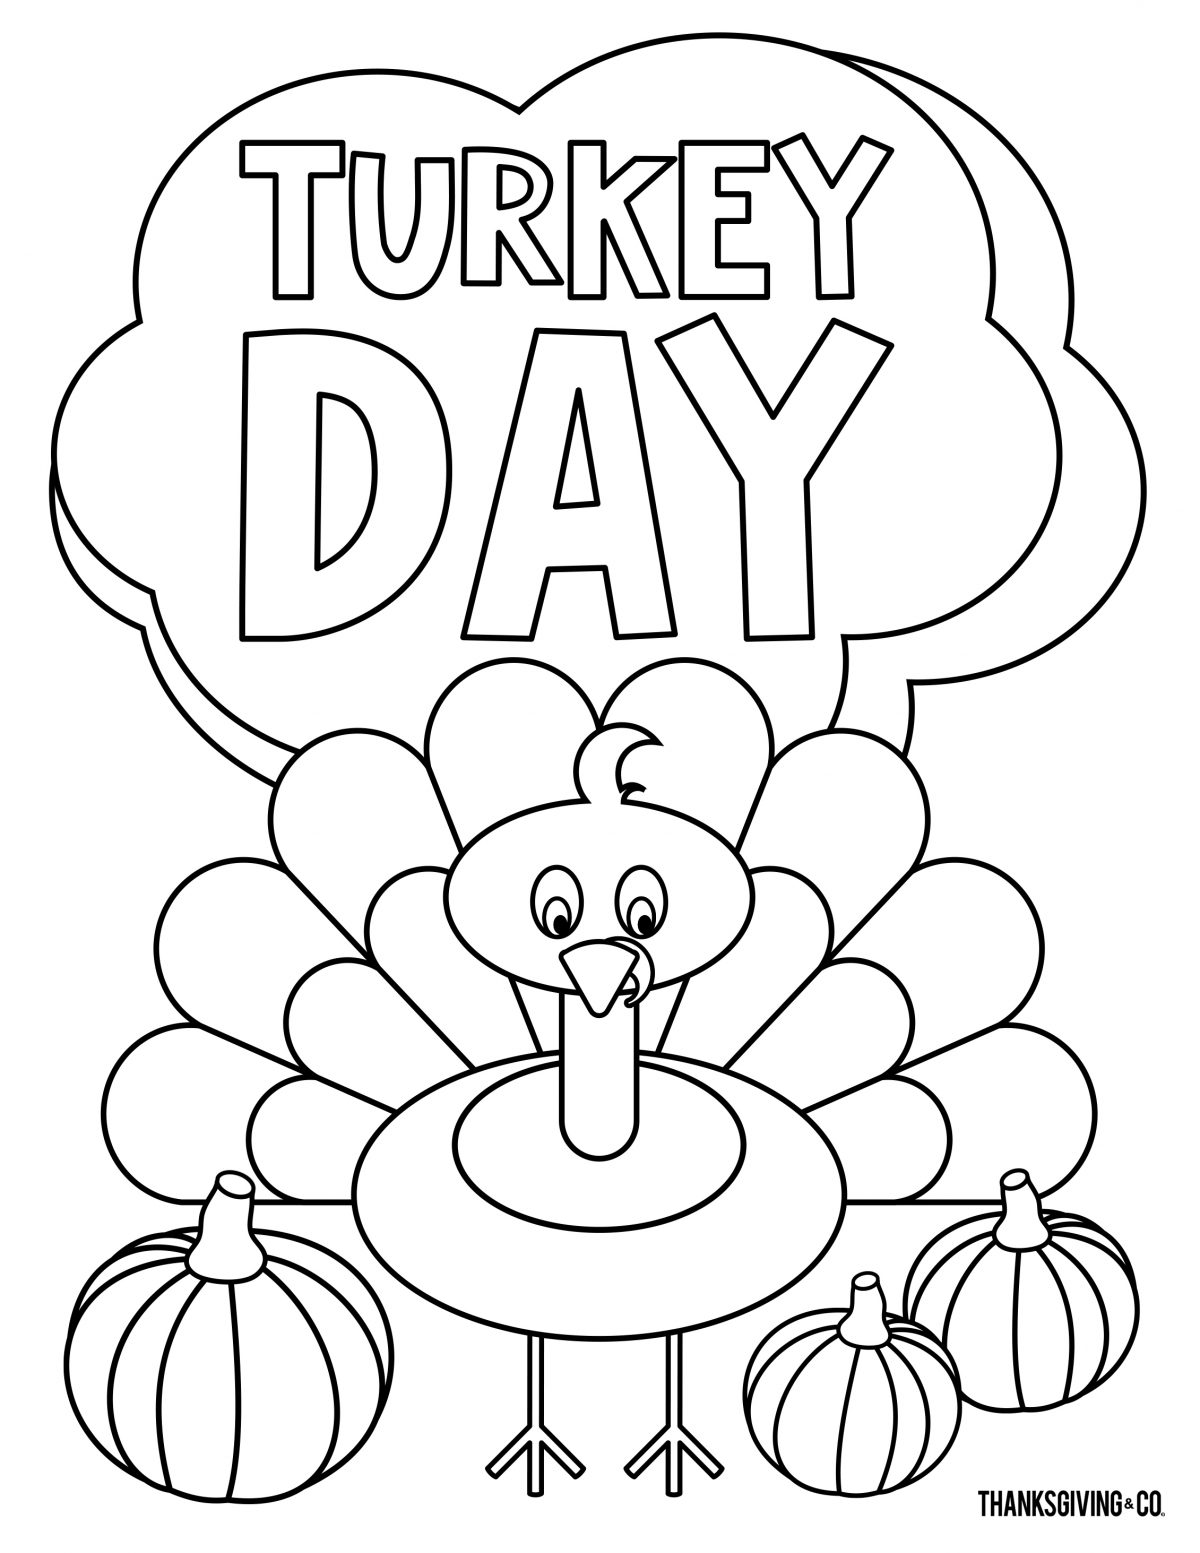 7 Thanksgiving Coloring Pages You Can Print